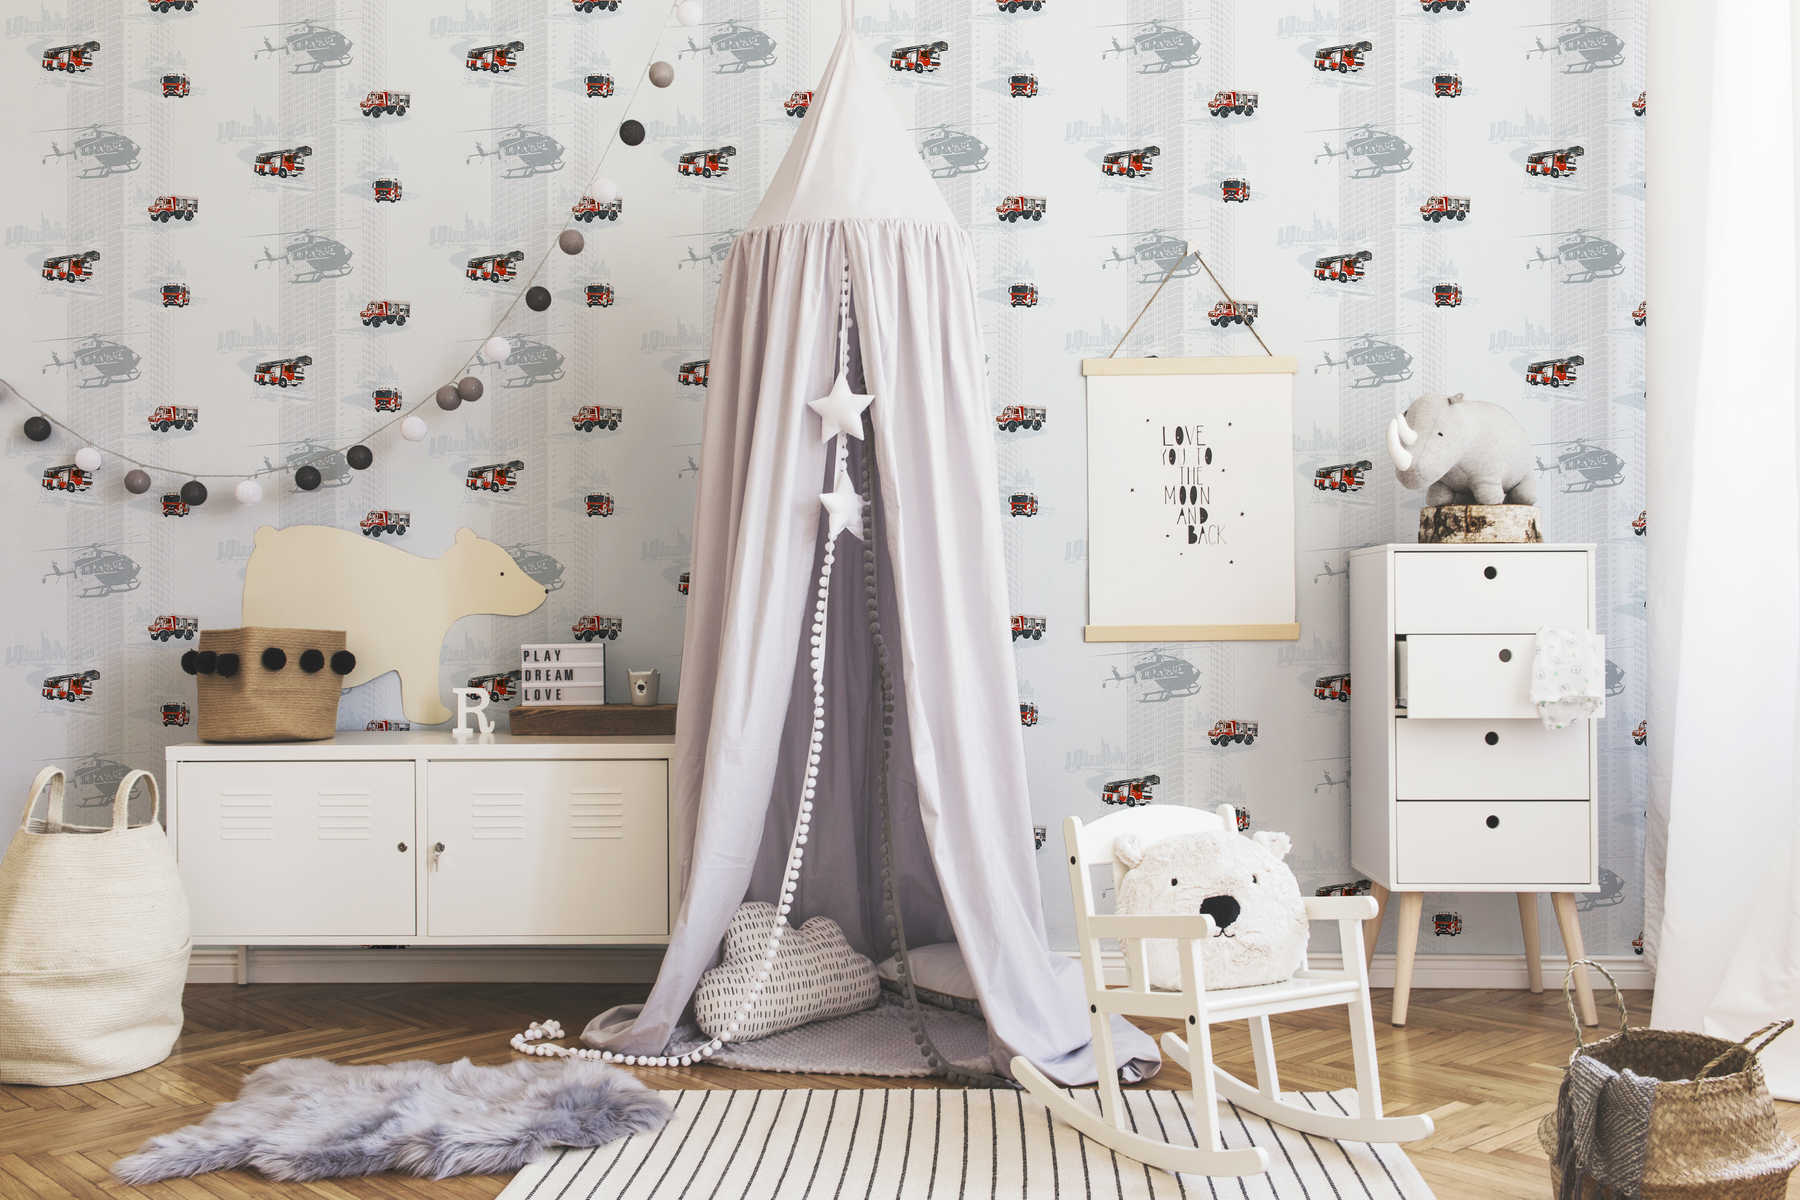             Kids room wallpaper fire department pattern for boys - grey, red, black
        